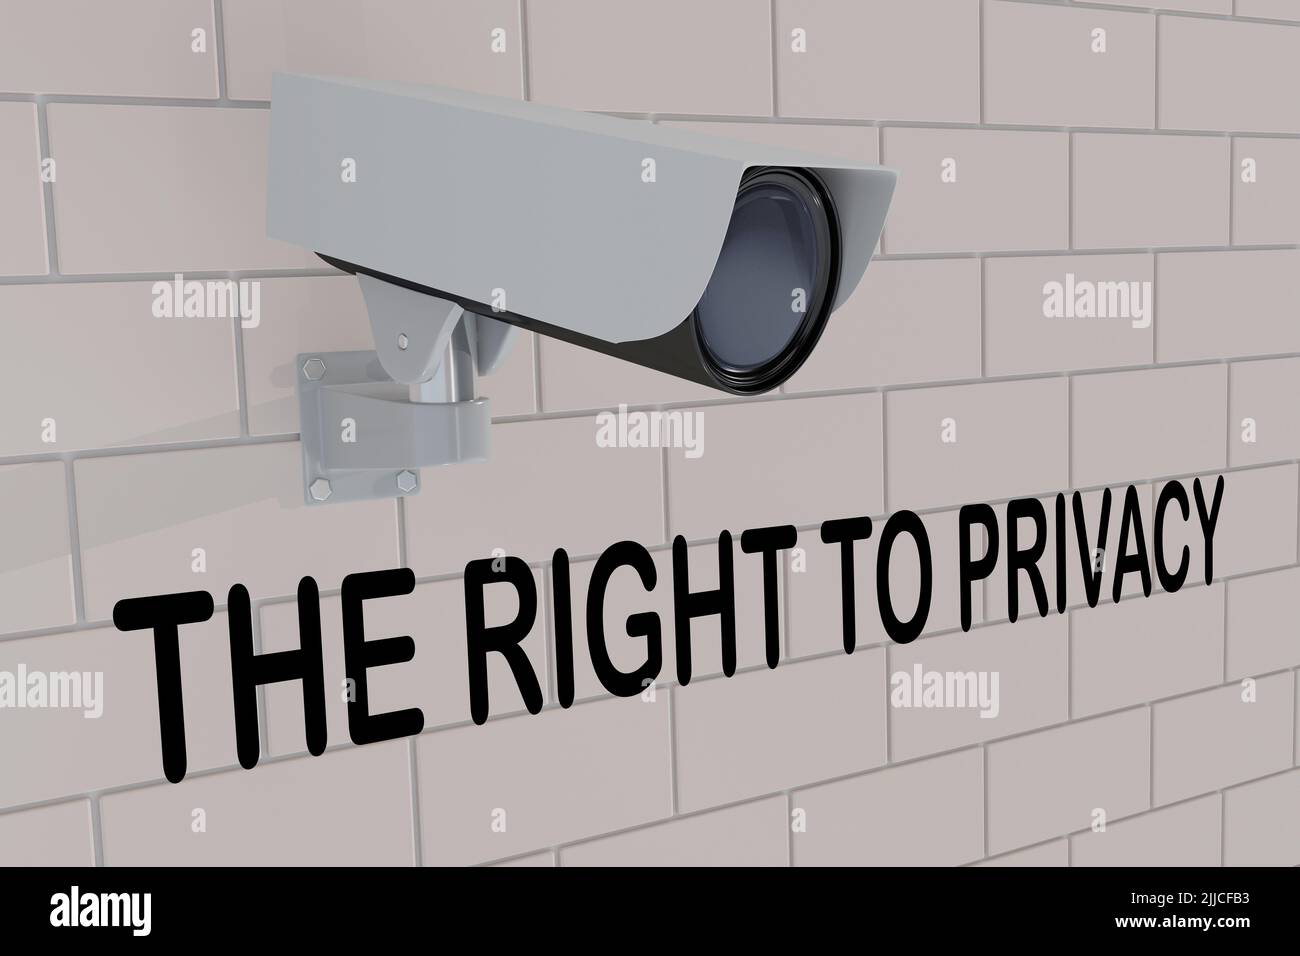 3D illustration of The Right to Privacy title under security camera which is mounted on brick wall Stock Photo